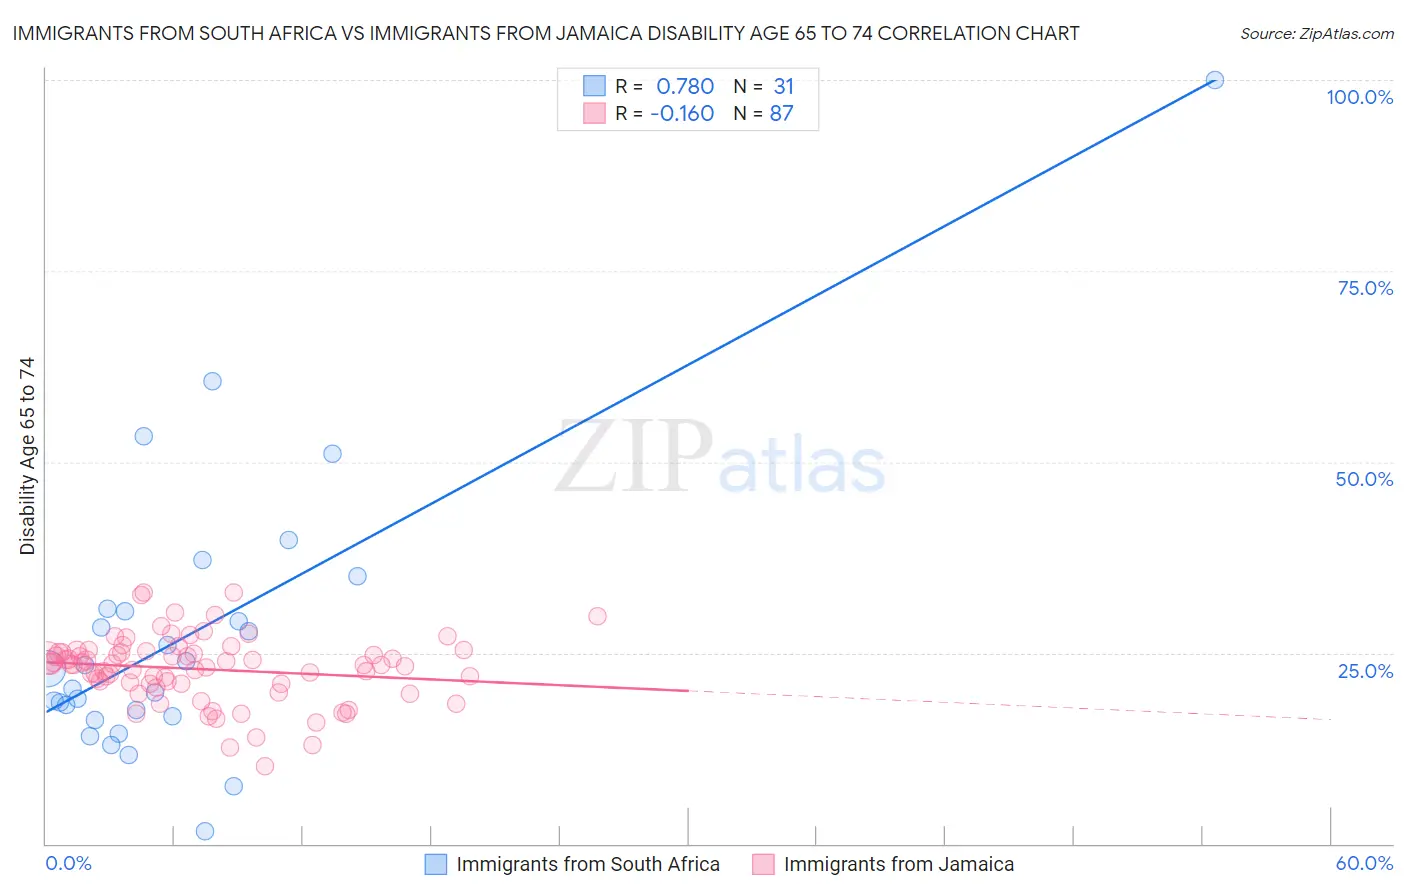 Immigrants from South Africa vs Immigrants from Jamaica Disability Age 65 to 74